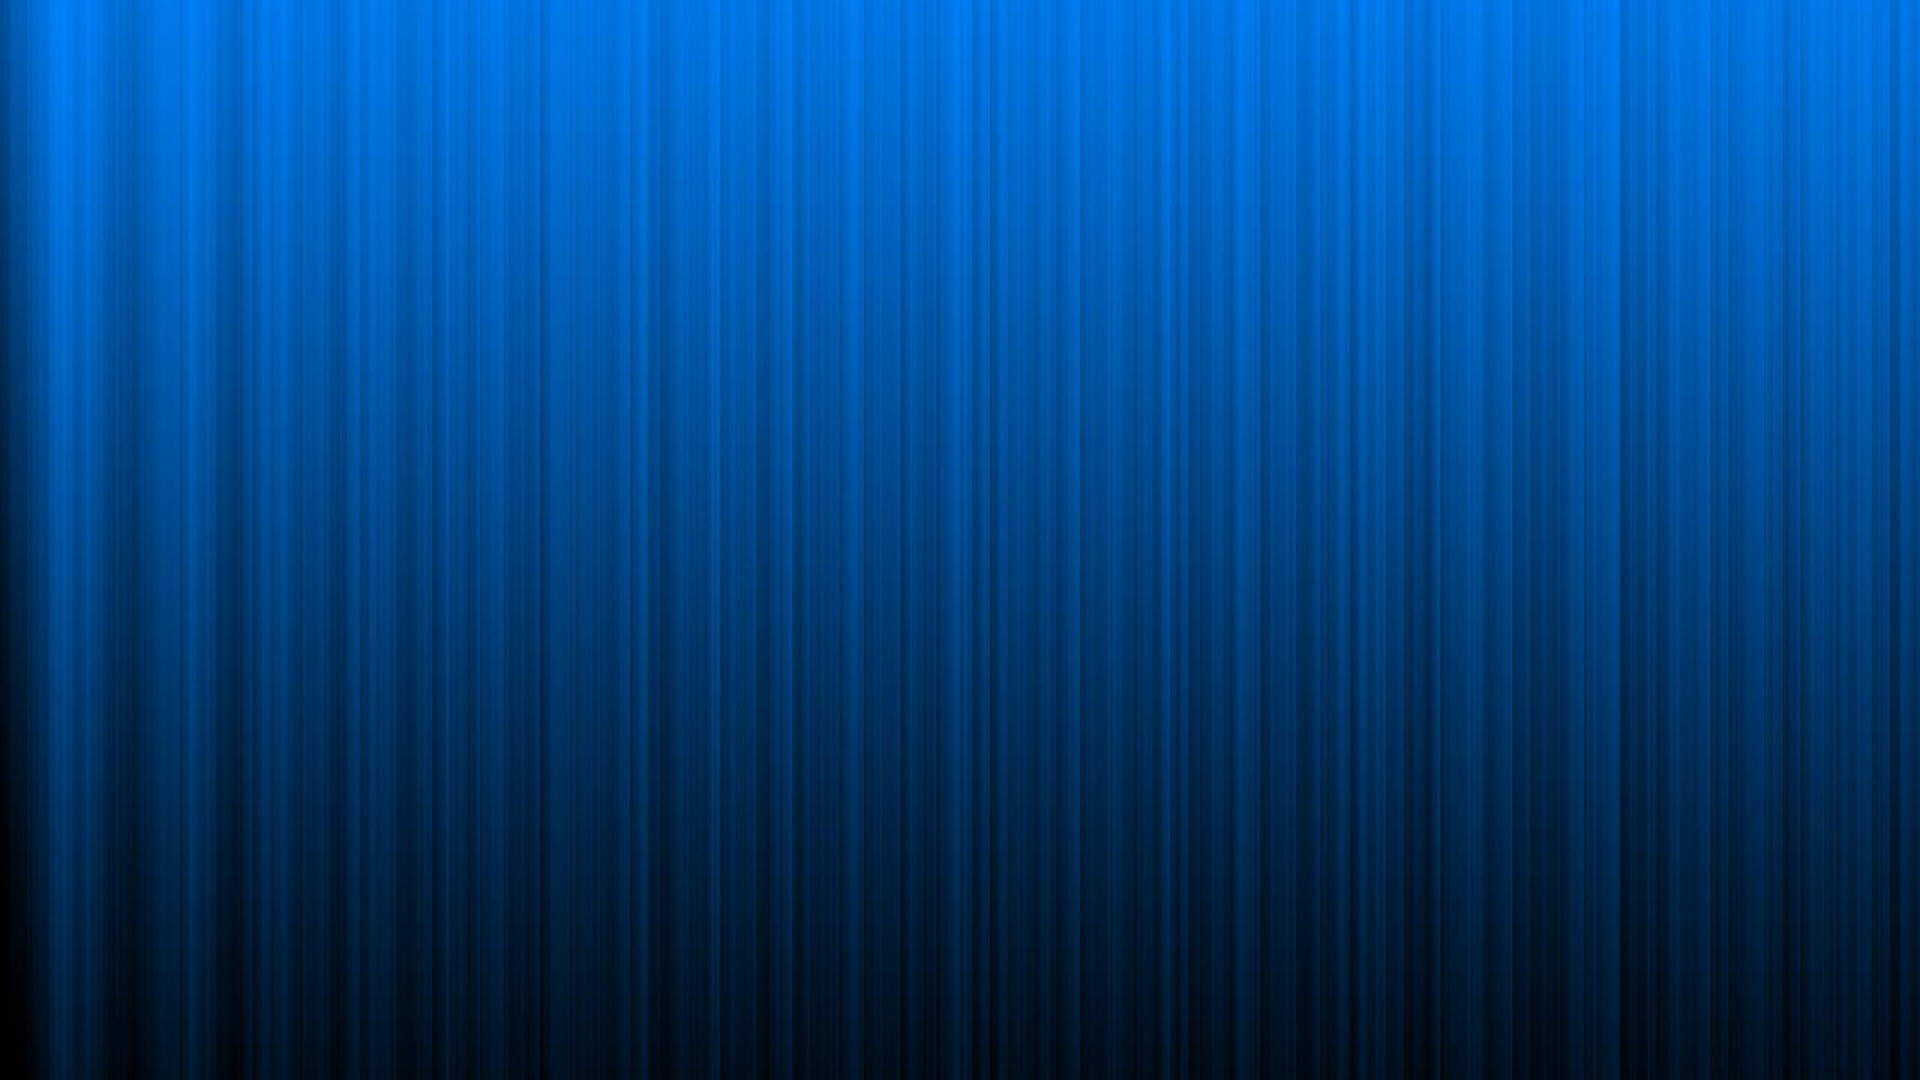 Wallpapers Computer Blue With high-resolution 1920X1080 pixel. You can use this wallpaper for your Desktop Computer Backgrounds, Mac Wallpapers, Android Lock screen or iPhone Screensavers and another smartphone device